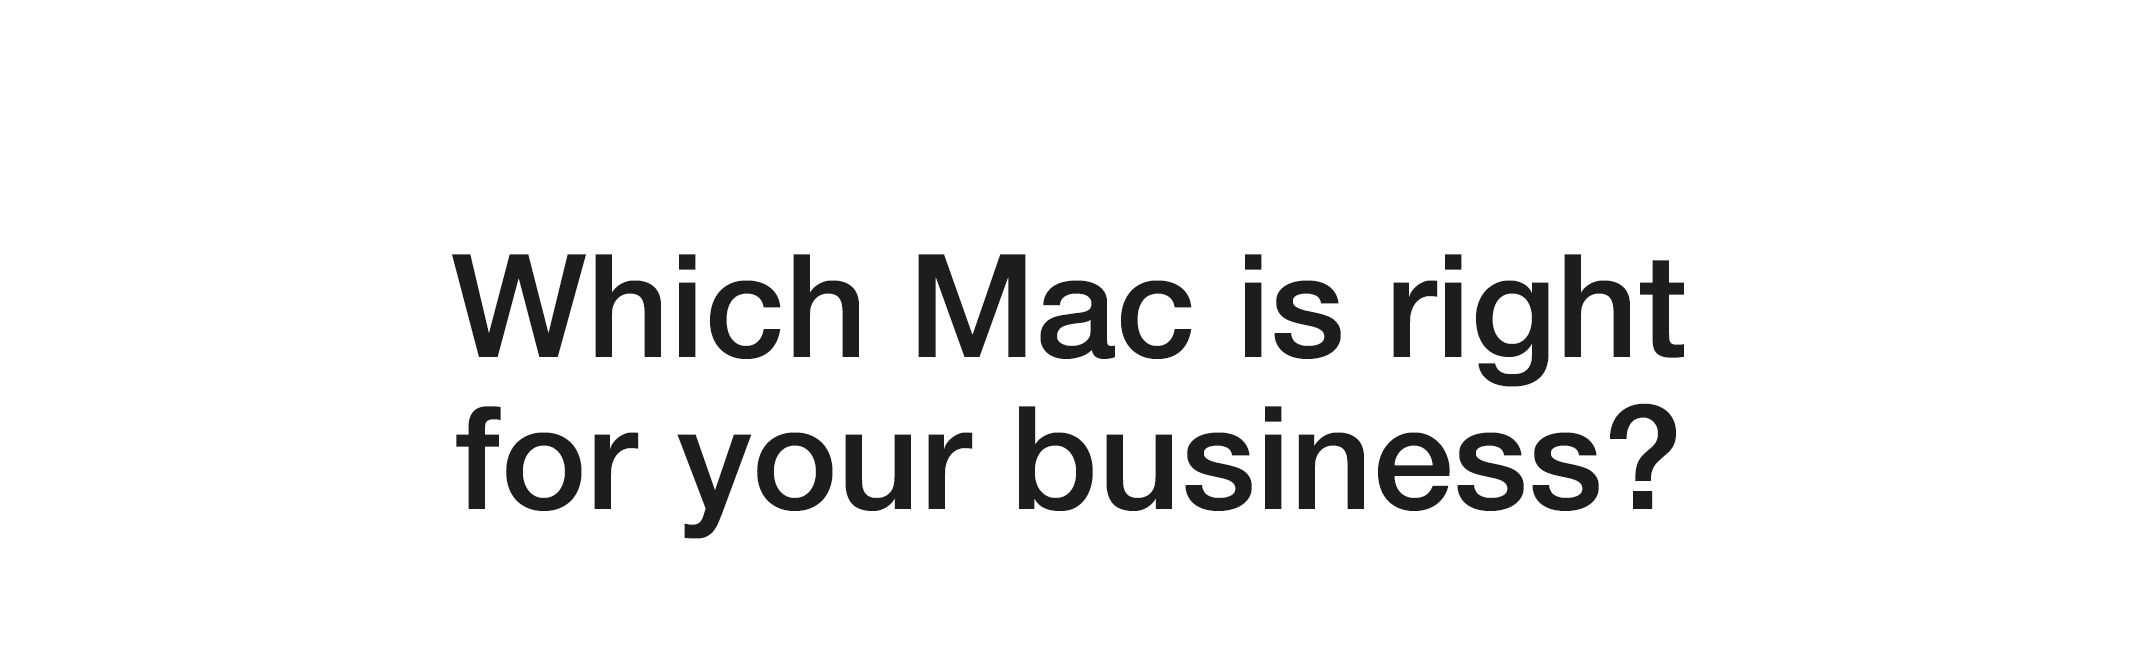 Which Mac is right for your business?